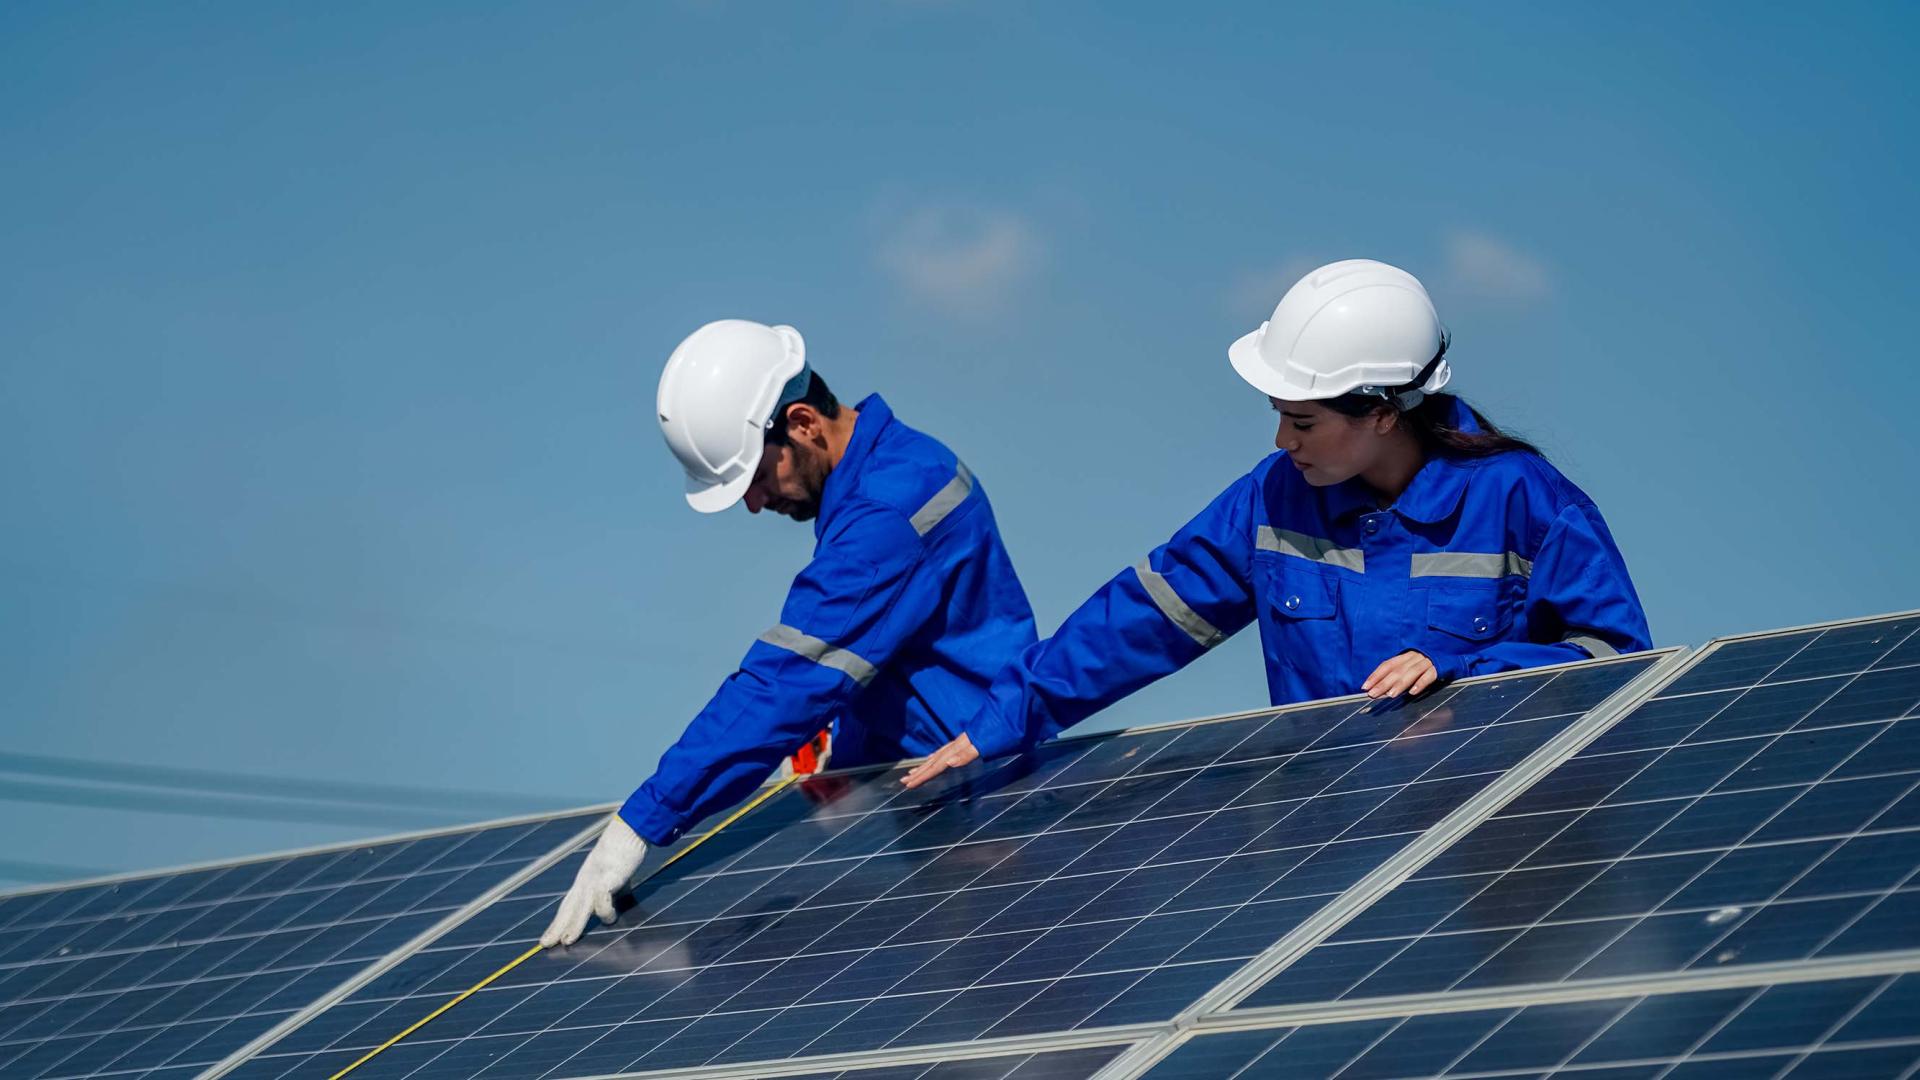 Apprentice and worker on solar panel